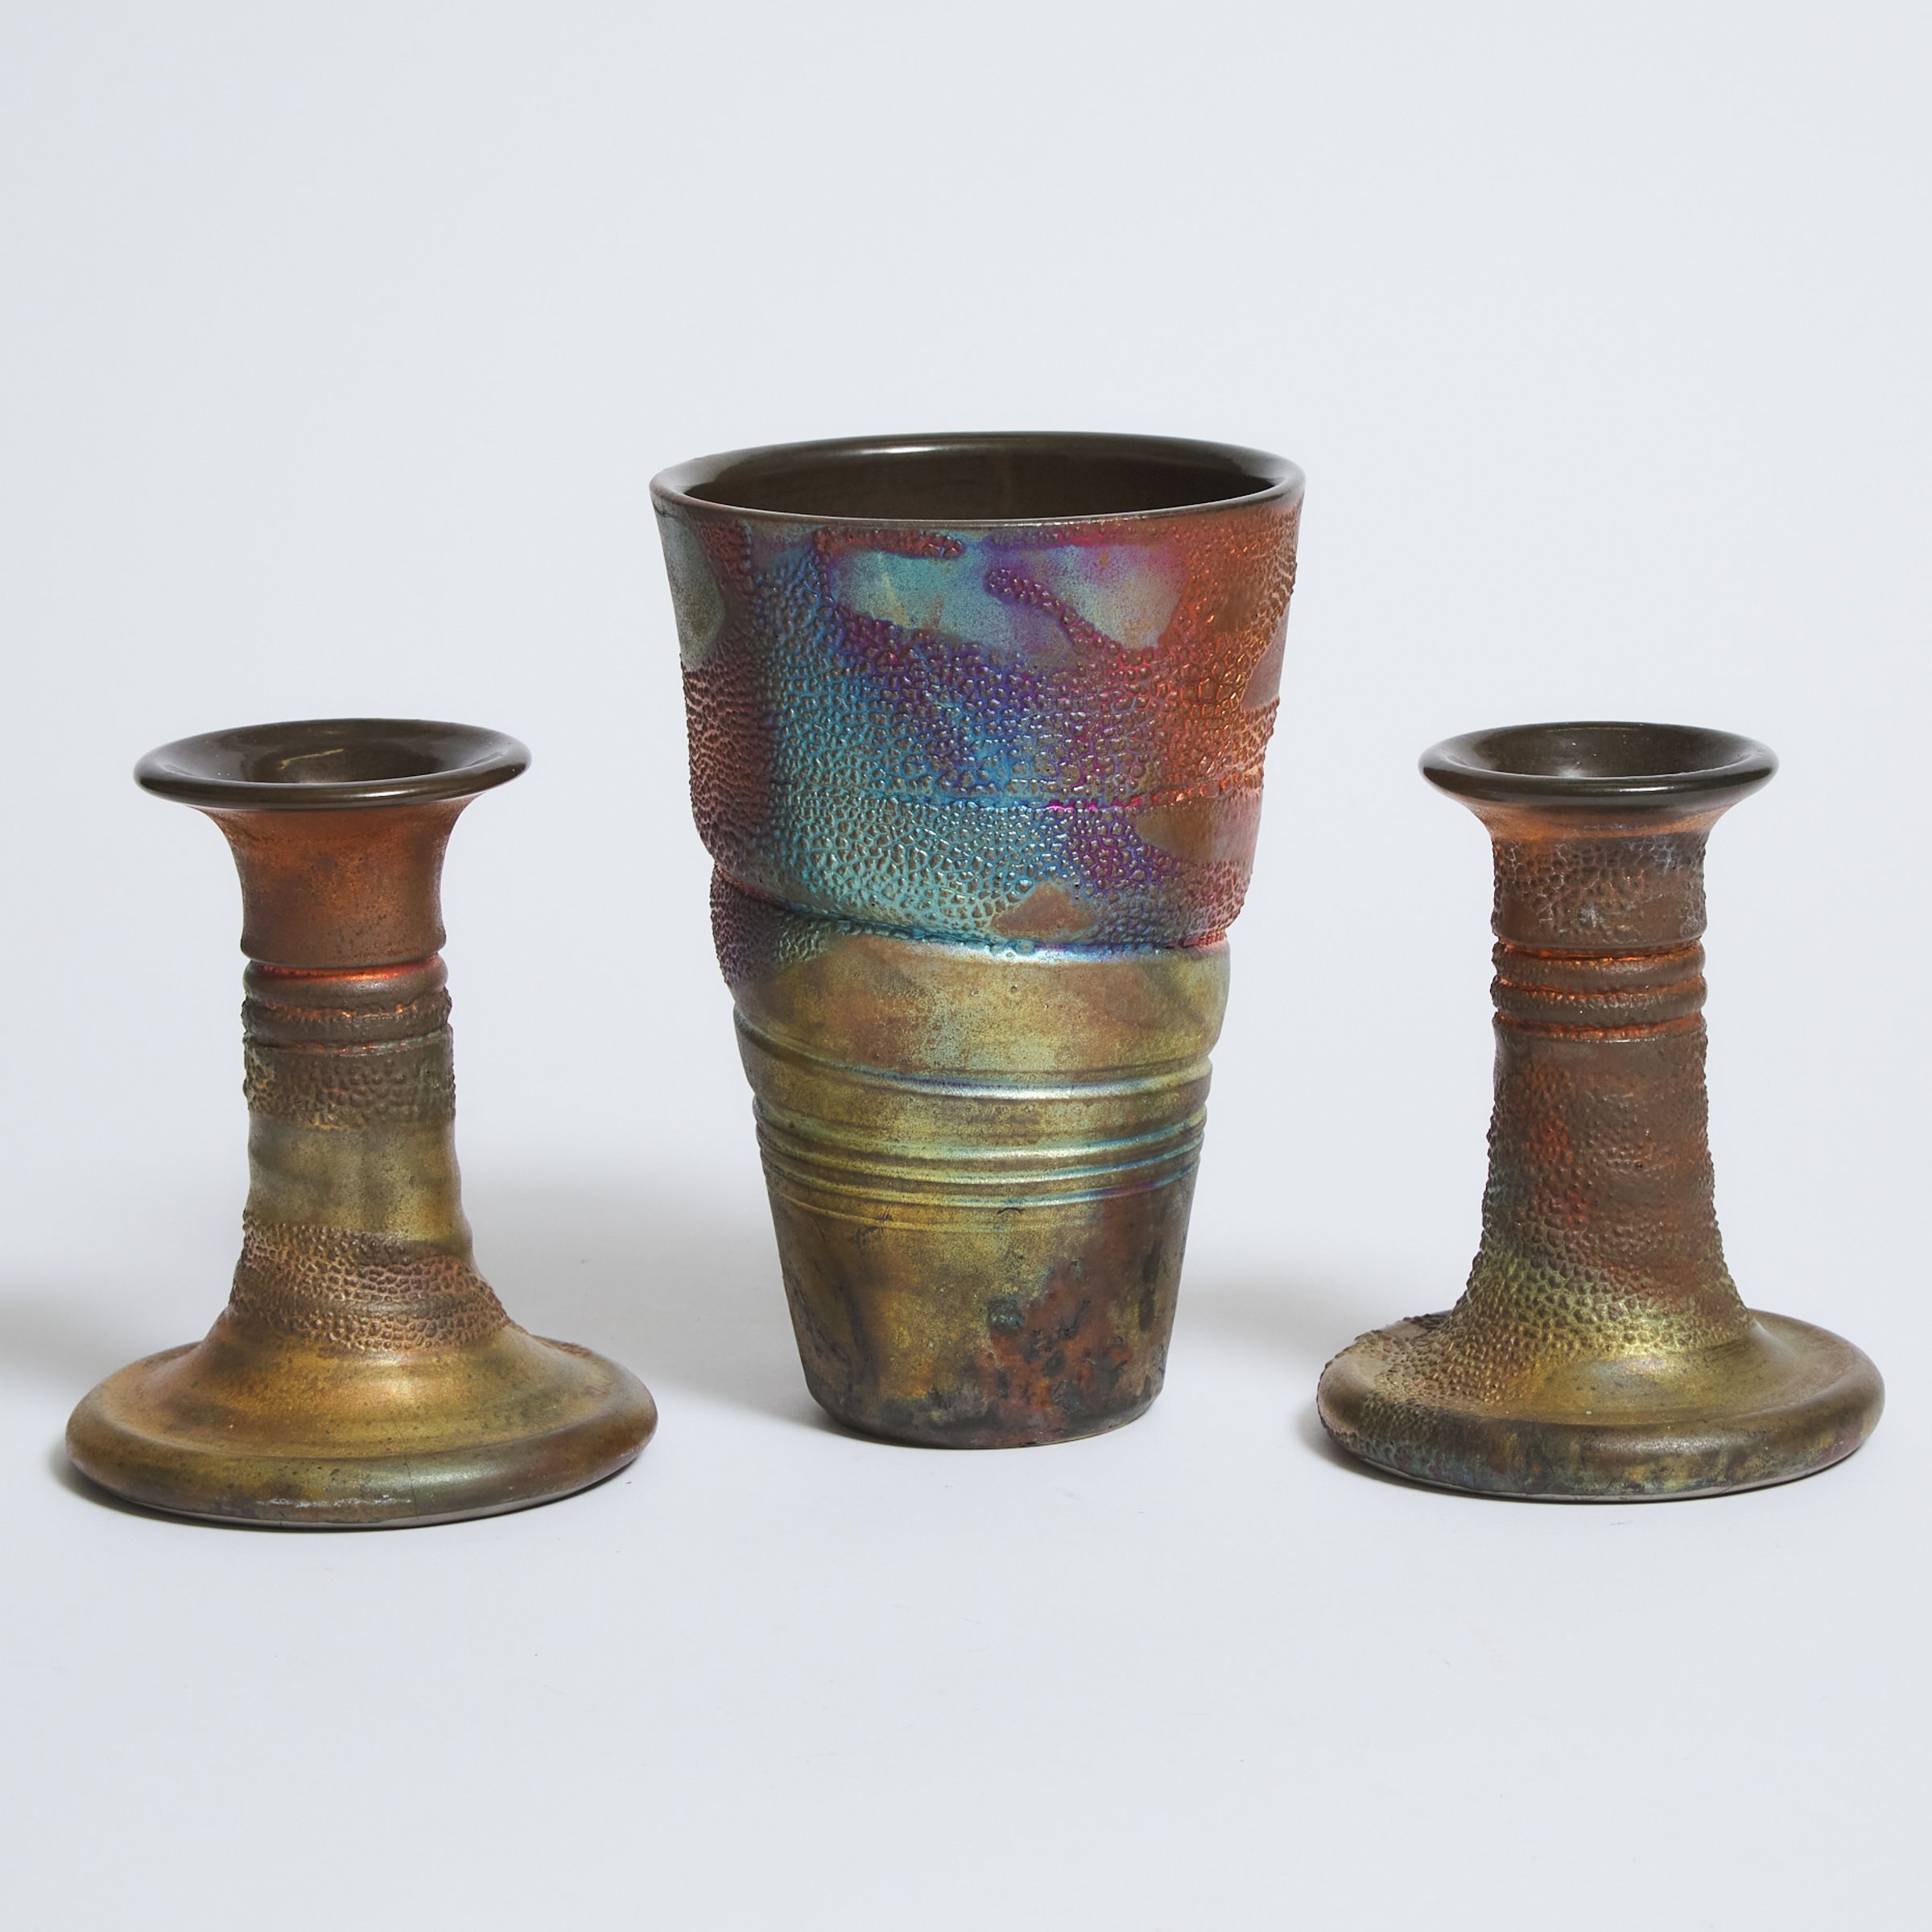 Peter Powning, R.C.A. (American/Canadian, b.1949), Raku Fired Vase and a Pair of Candlesticks, 1994